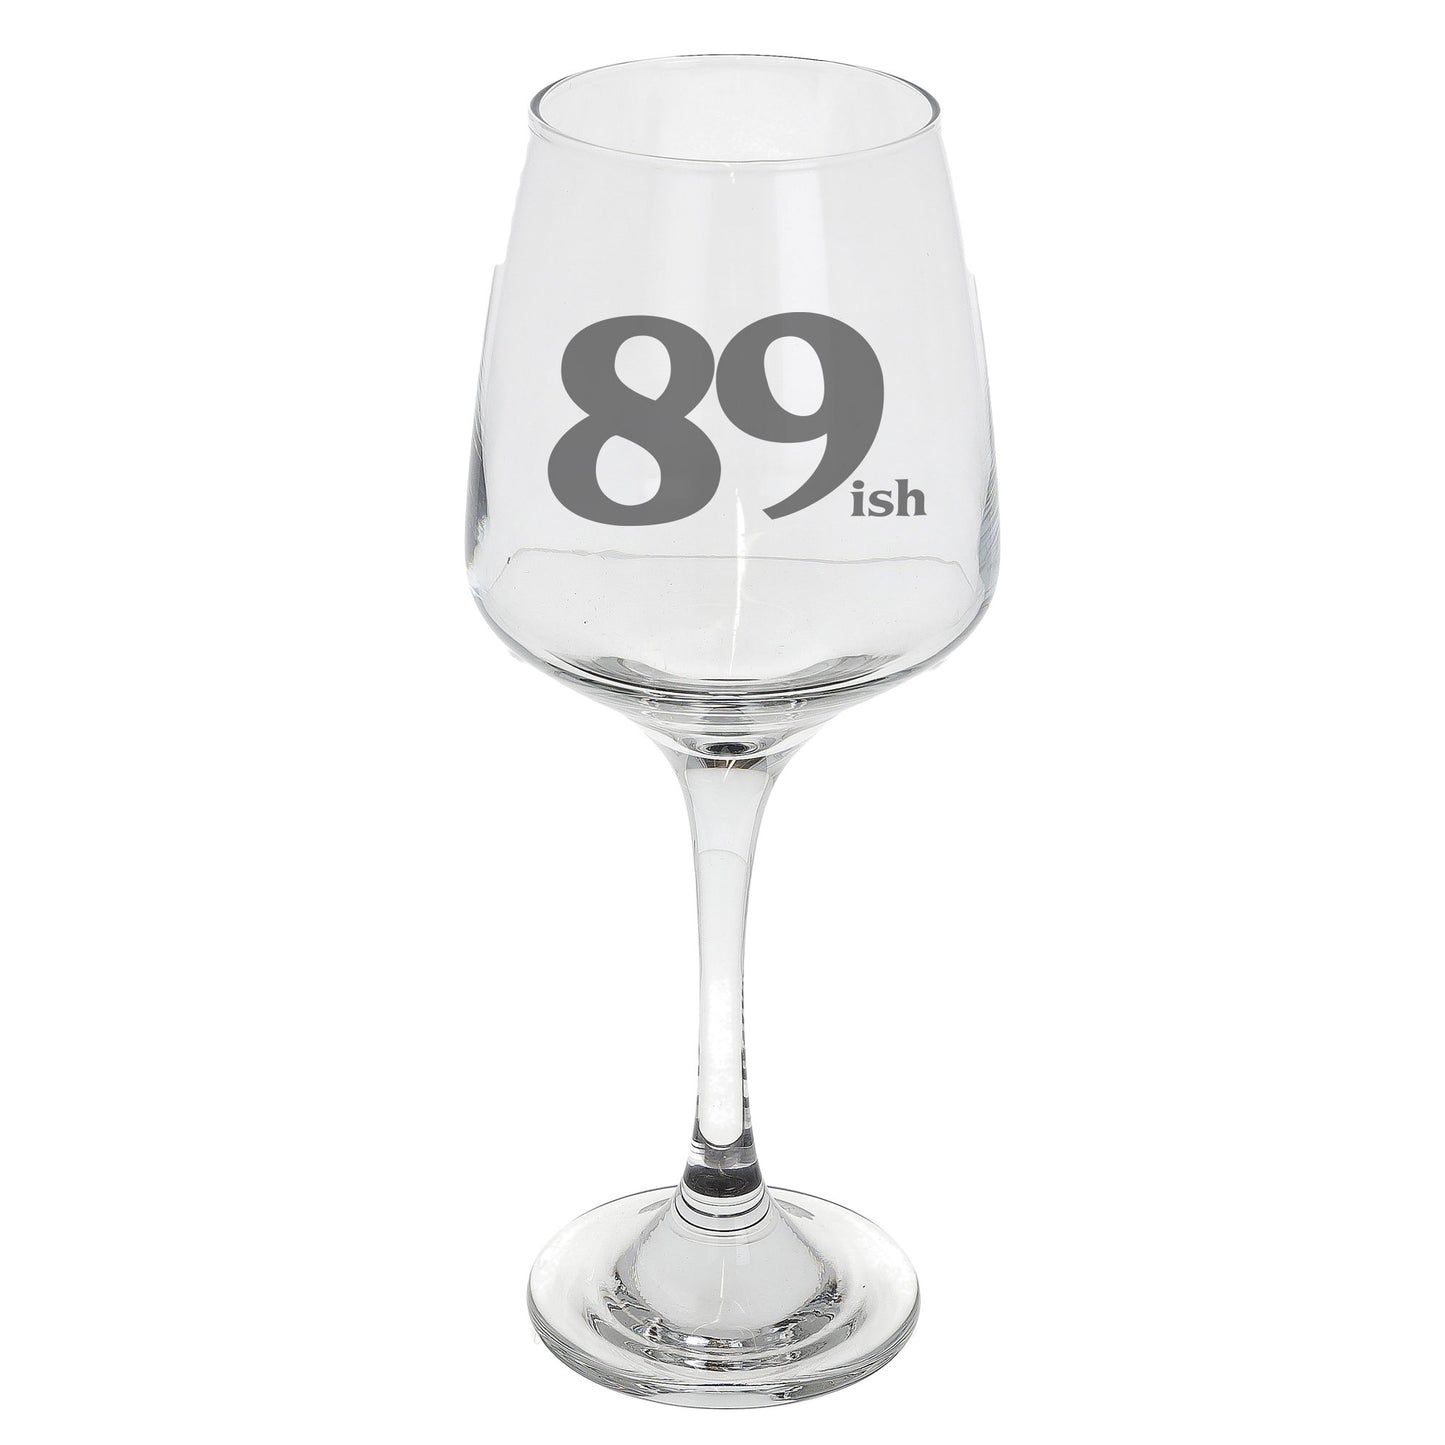 89ish Wine Glass and/or Coaster Set  - Always Looking Good - Wine Glass On Its Own  